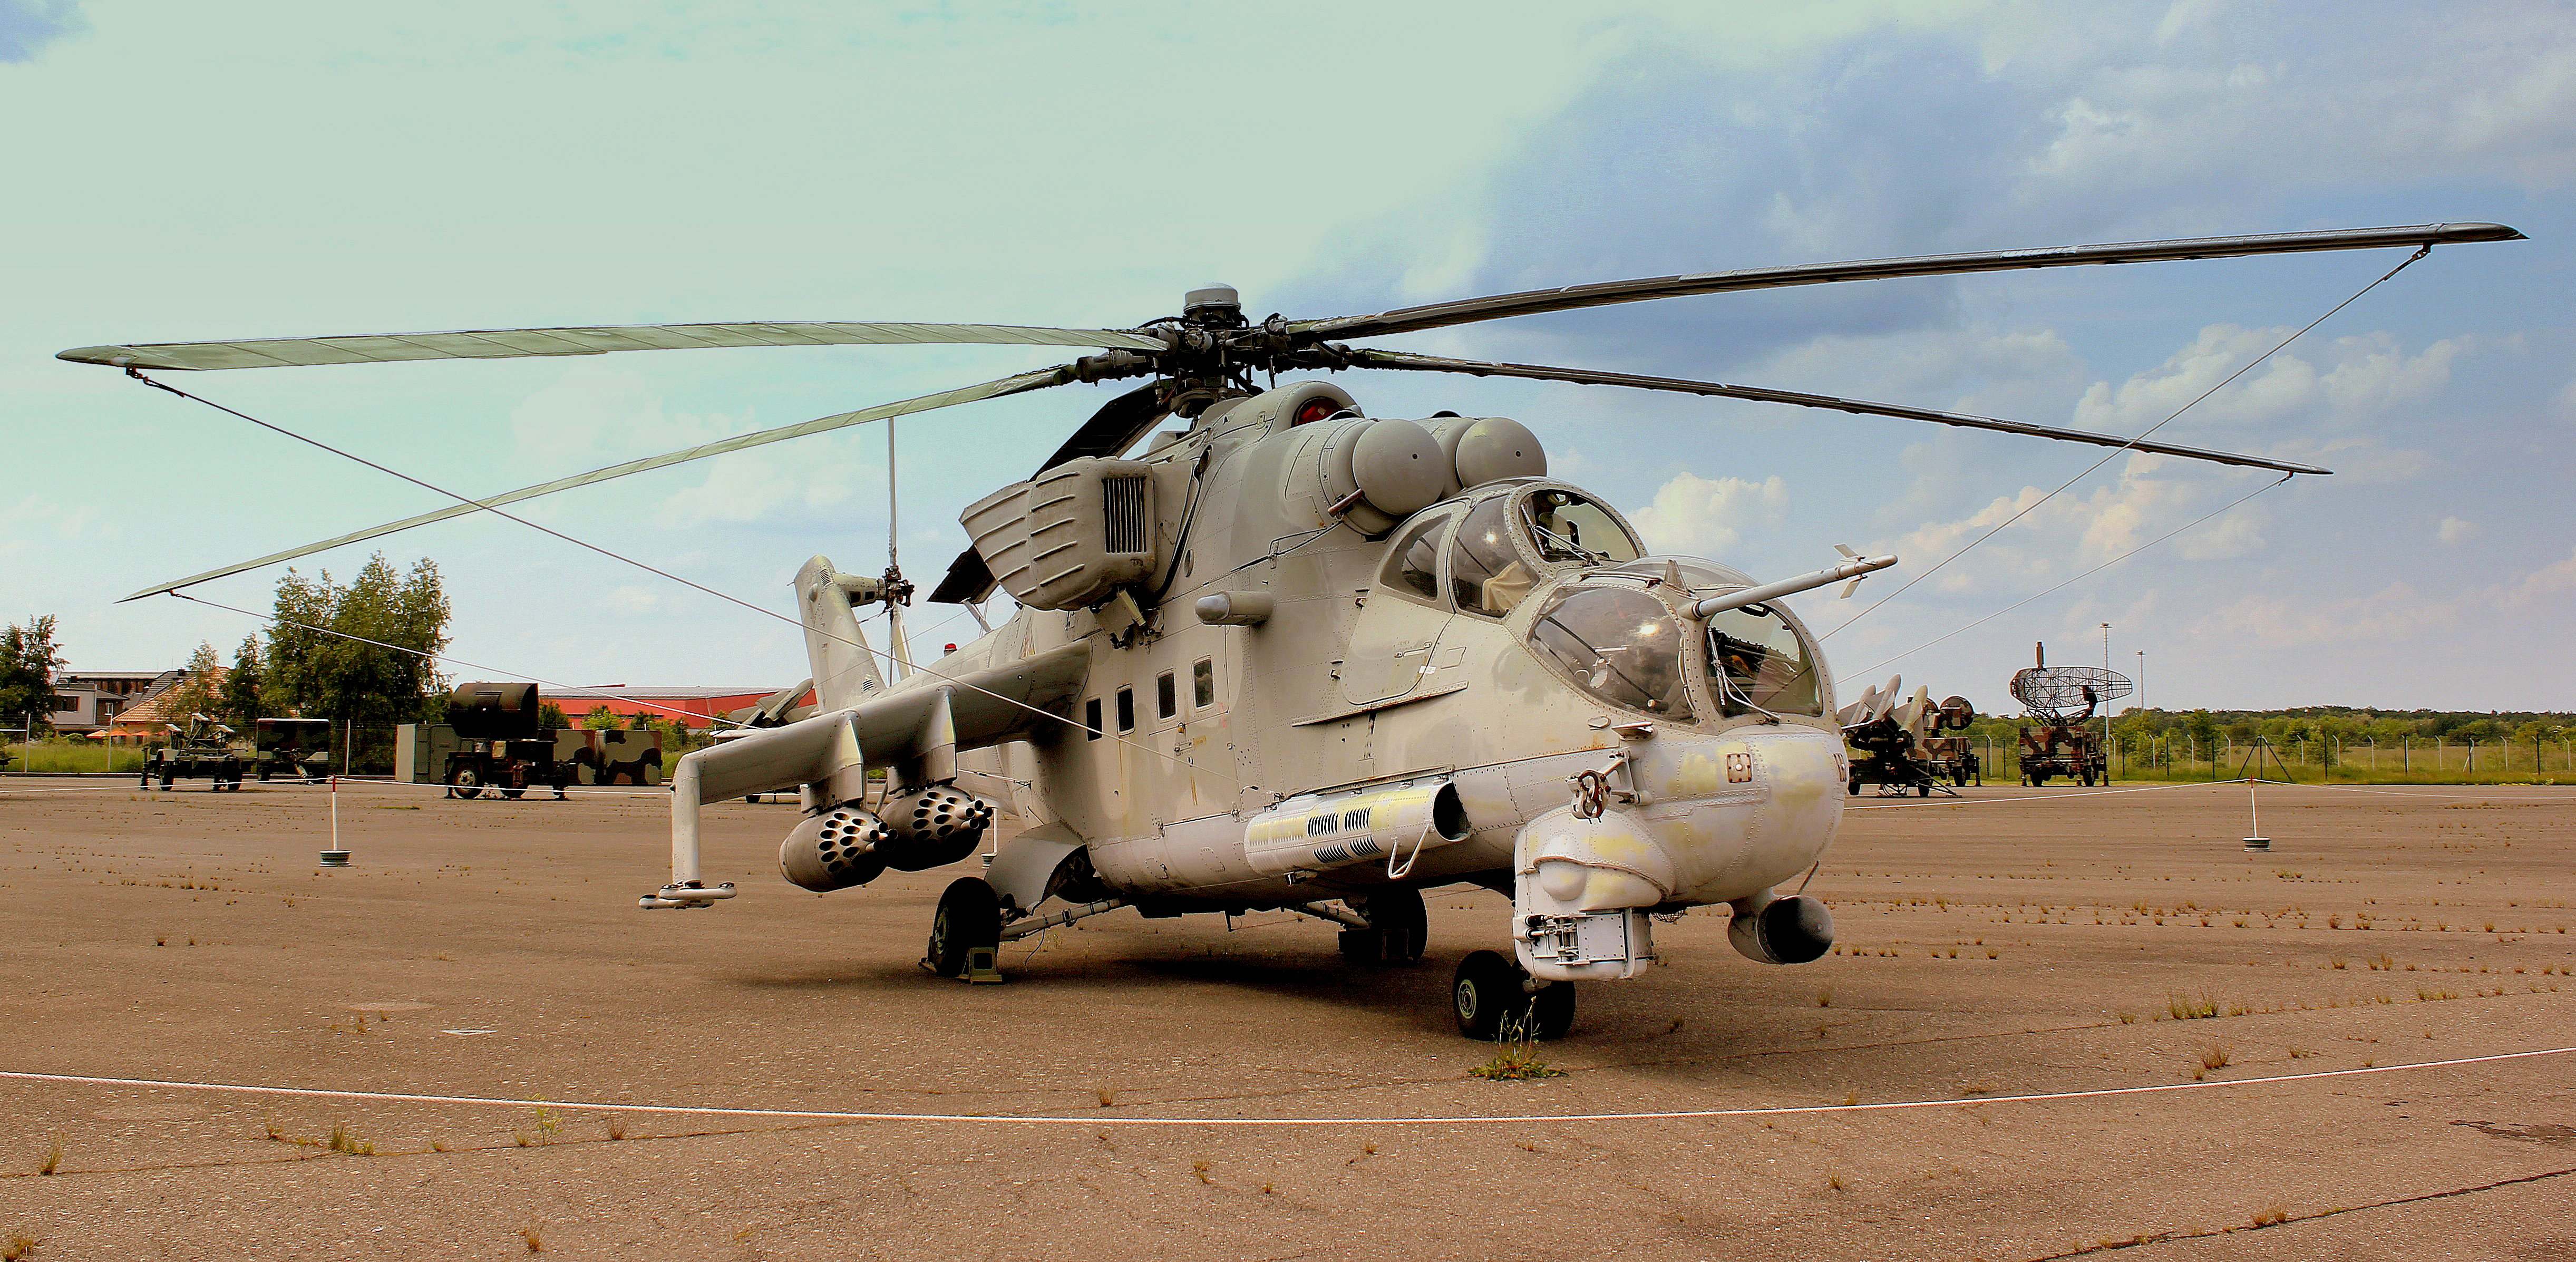 Mi_24_HIND_GUNSHIP_russian_russia_military_weapon_helicopter_aircraft__33__4887x2394.jpg